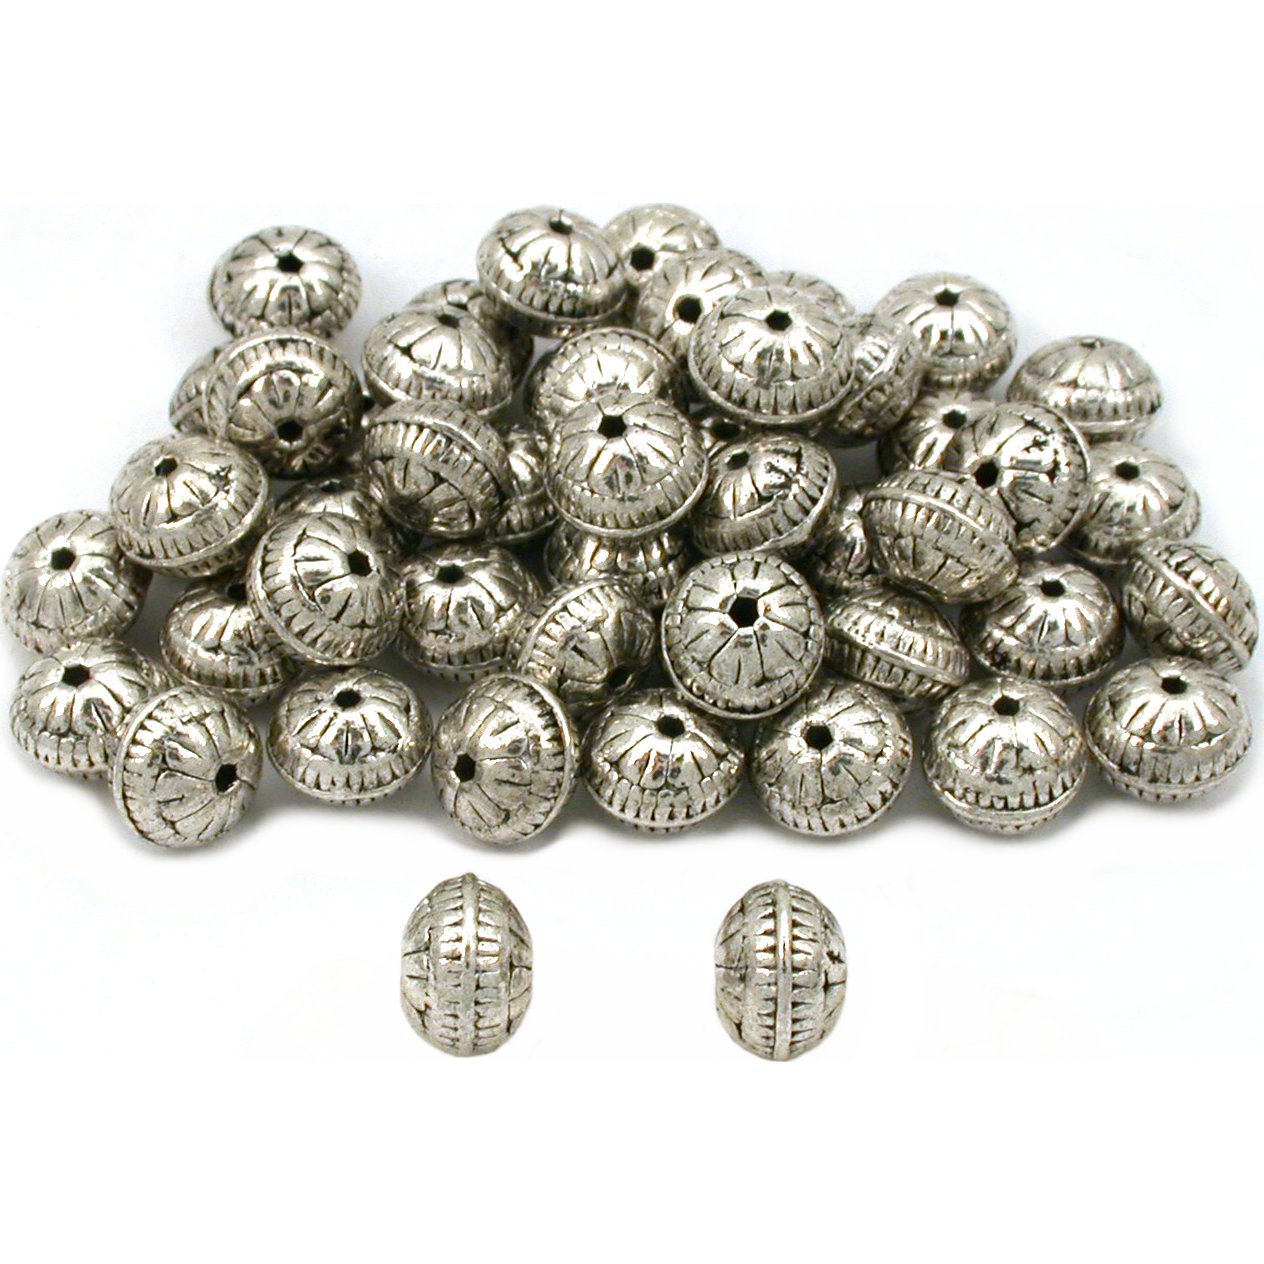 Bali Saucer Beads Antique Silver Plated 8.5mm 50Pcs Approx.